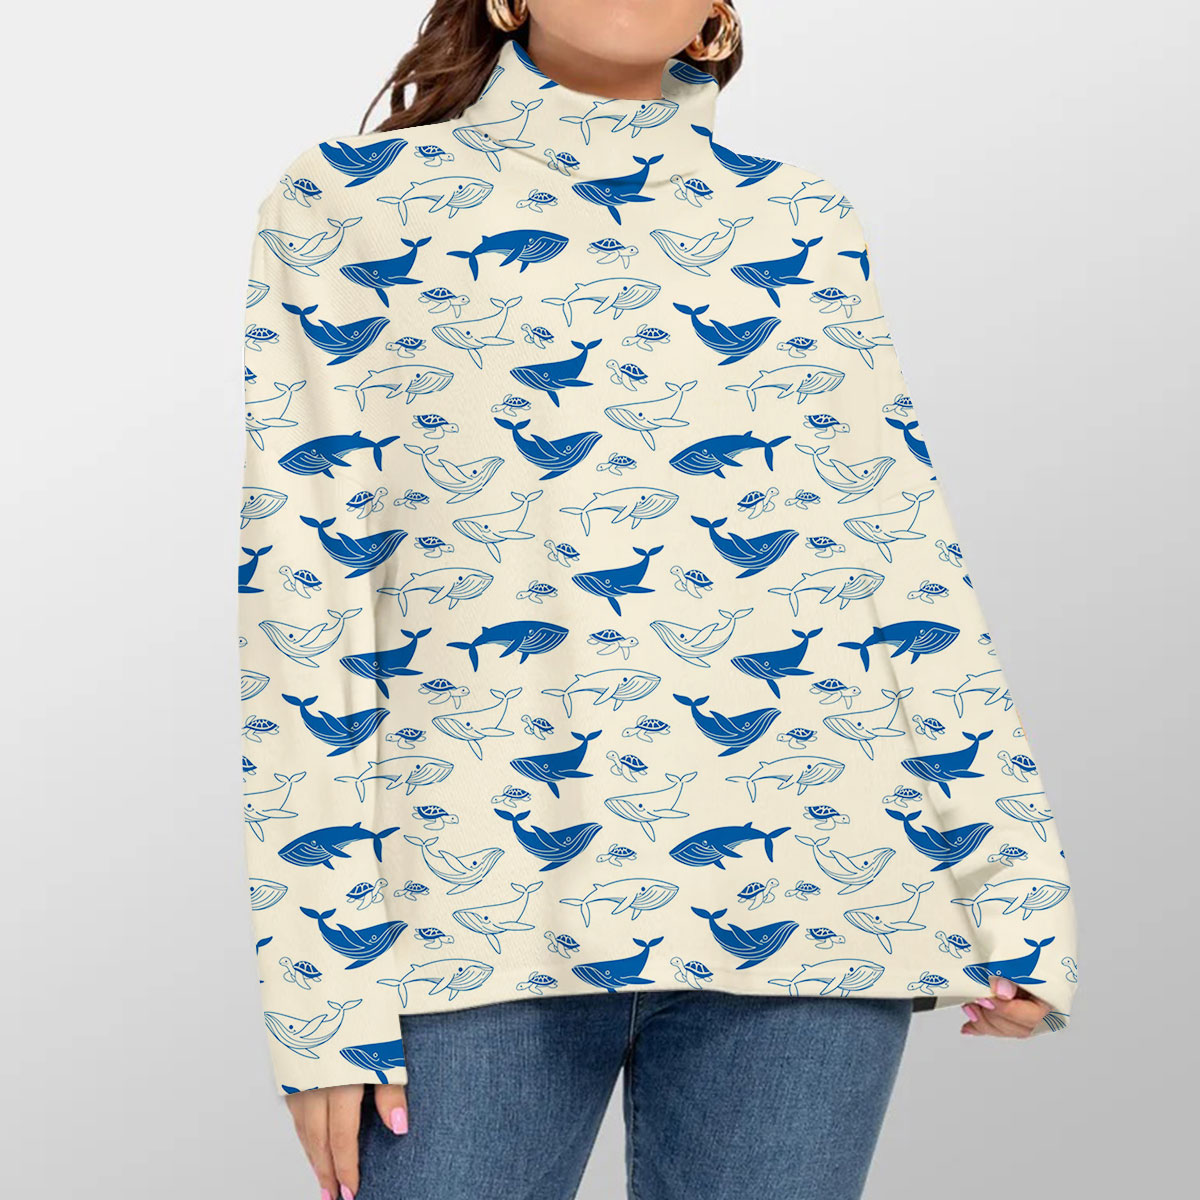 Blue Whale And White Turtleneck Sweater